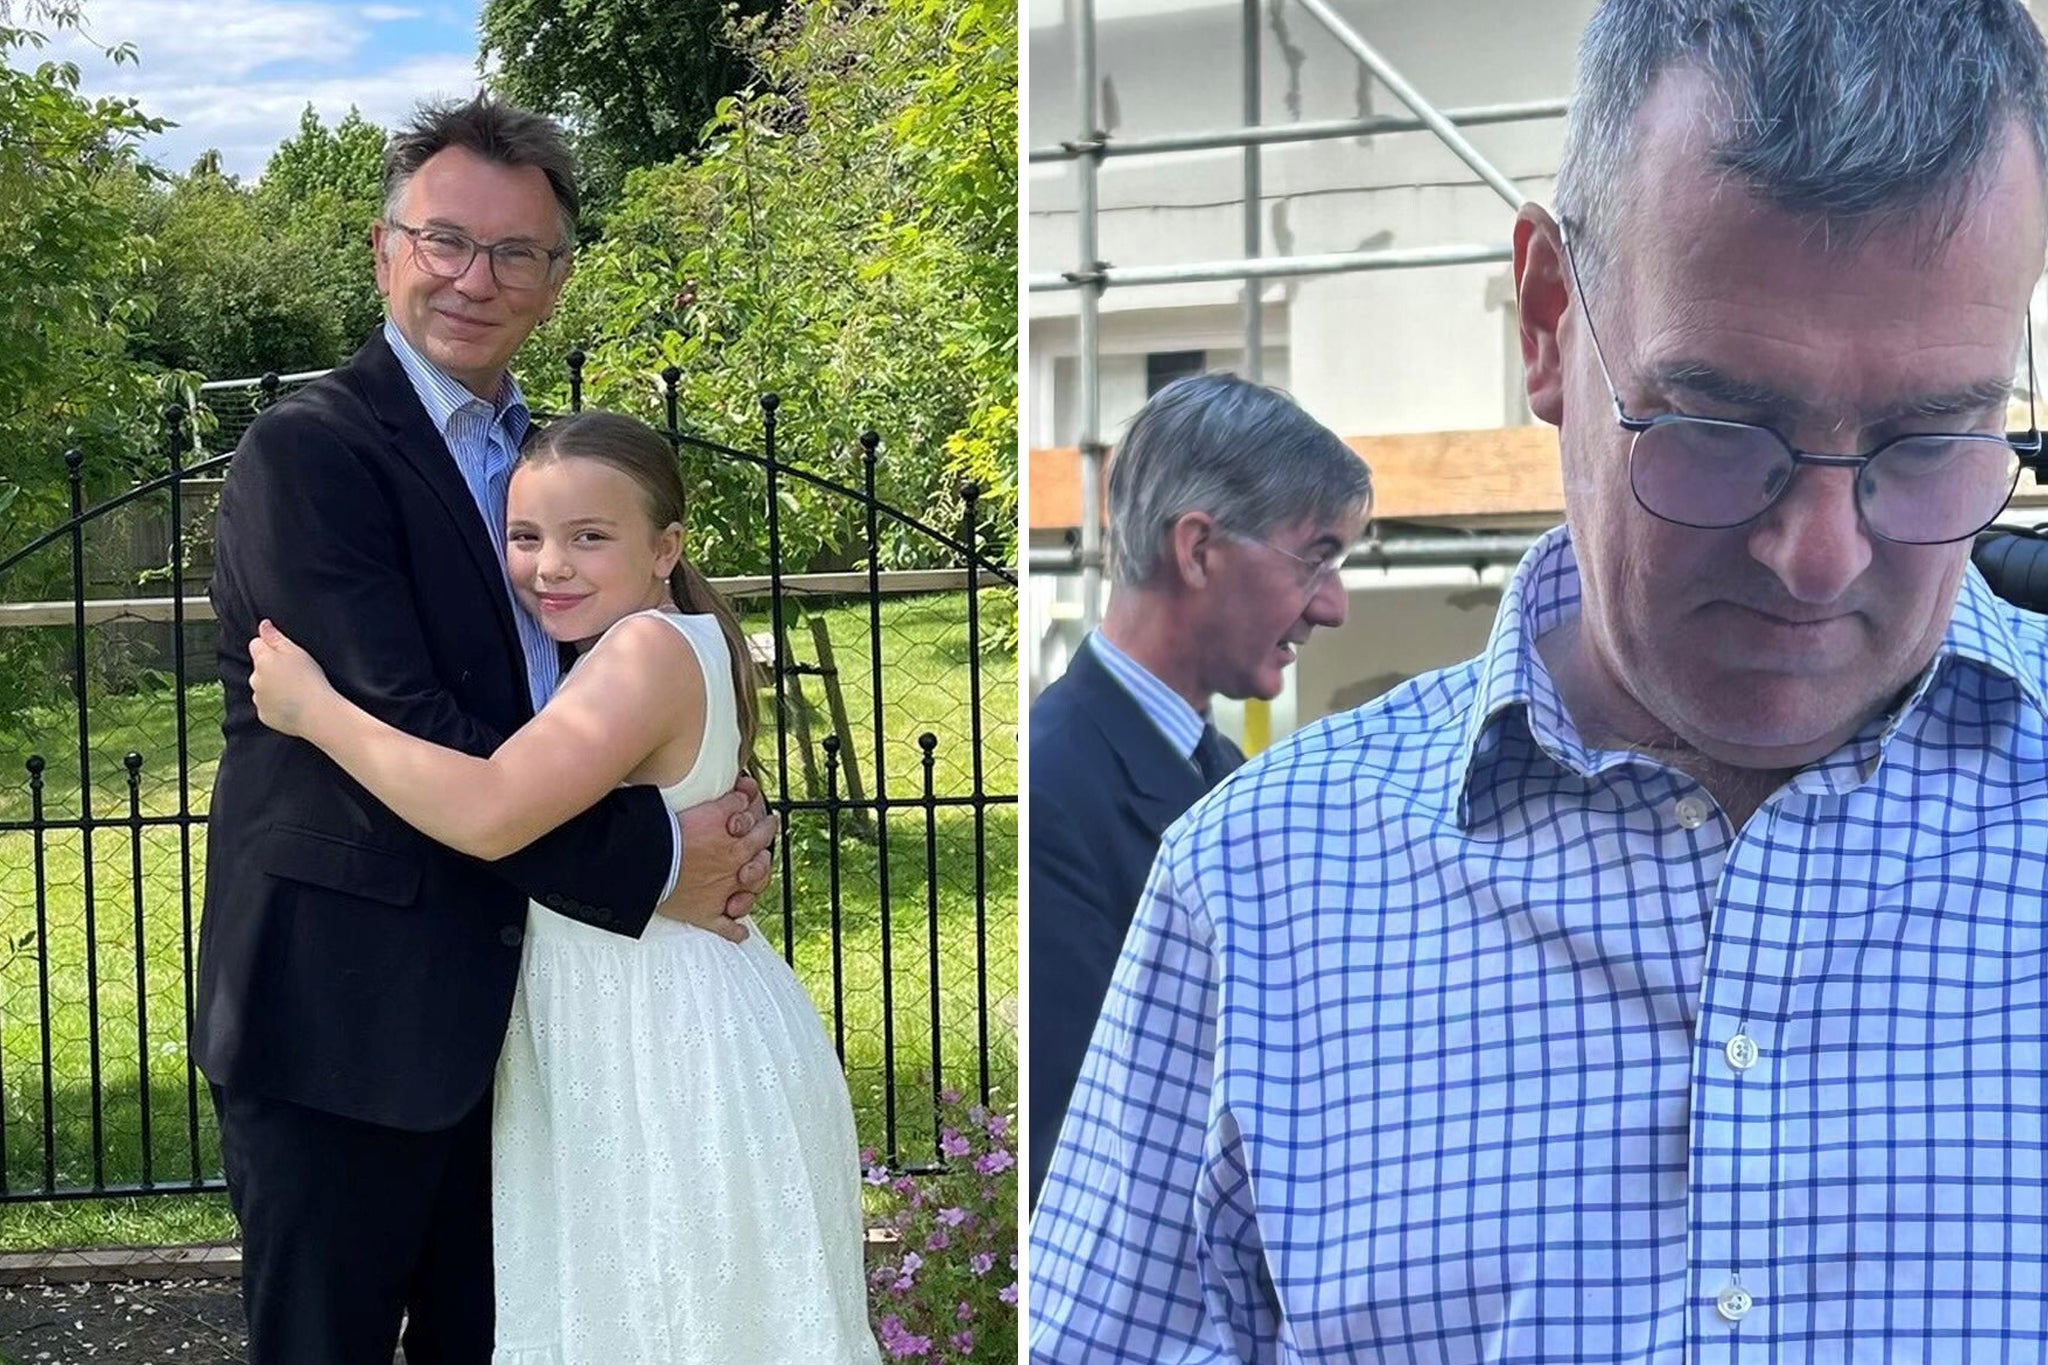 Gideon Davey with his daughter after she received her First Holy Communion during a church service attended by Jacob Rees-Mogg and his film crew